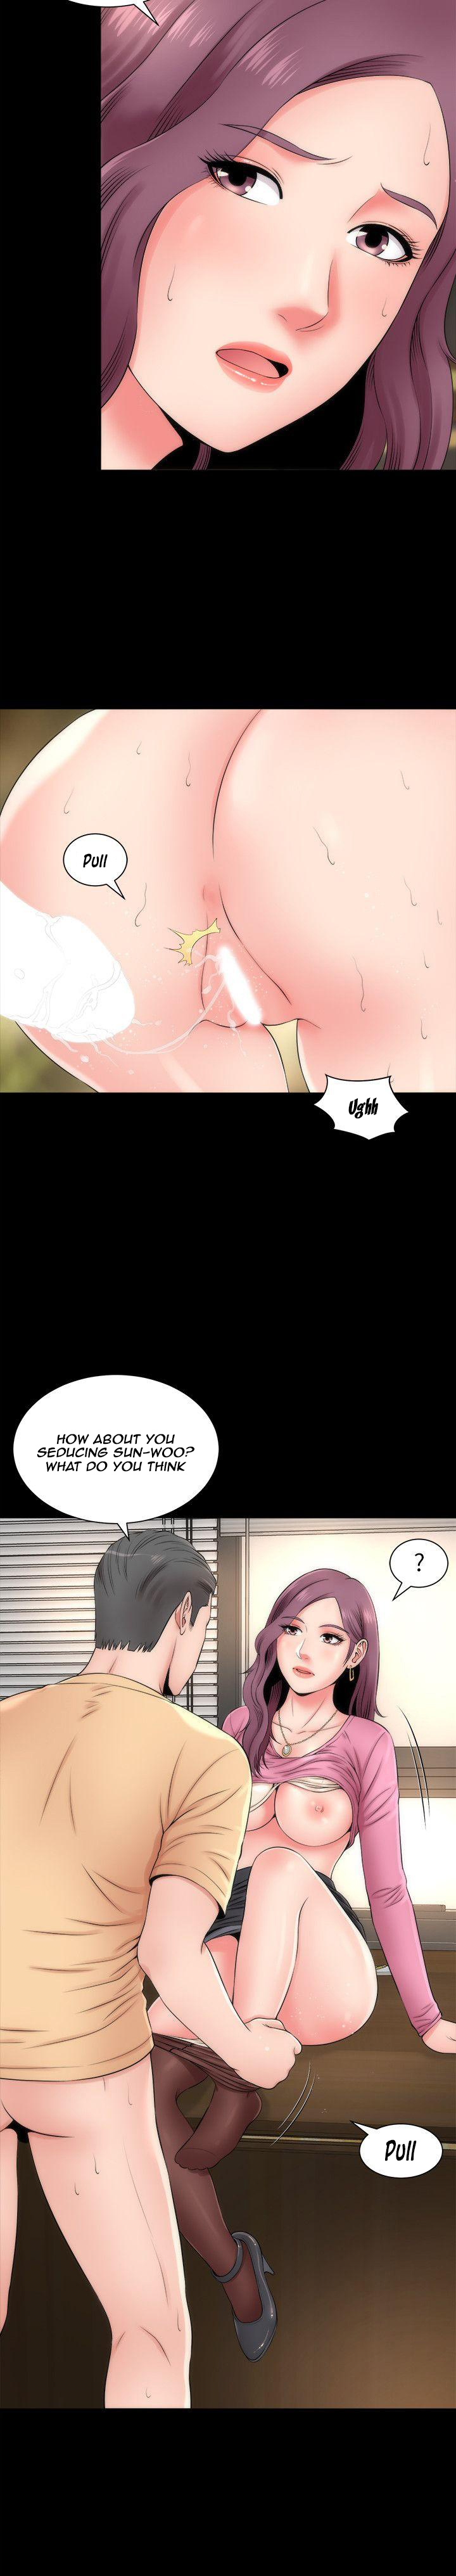 The Mother and Daughter Next Door - Chapter 1 Page 23